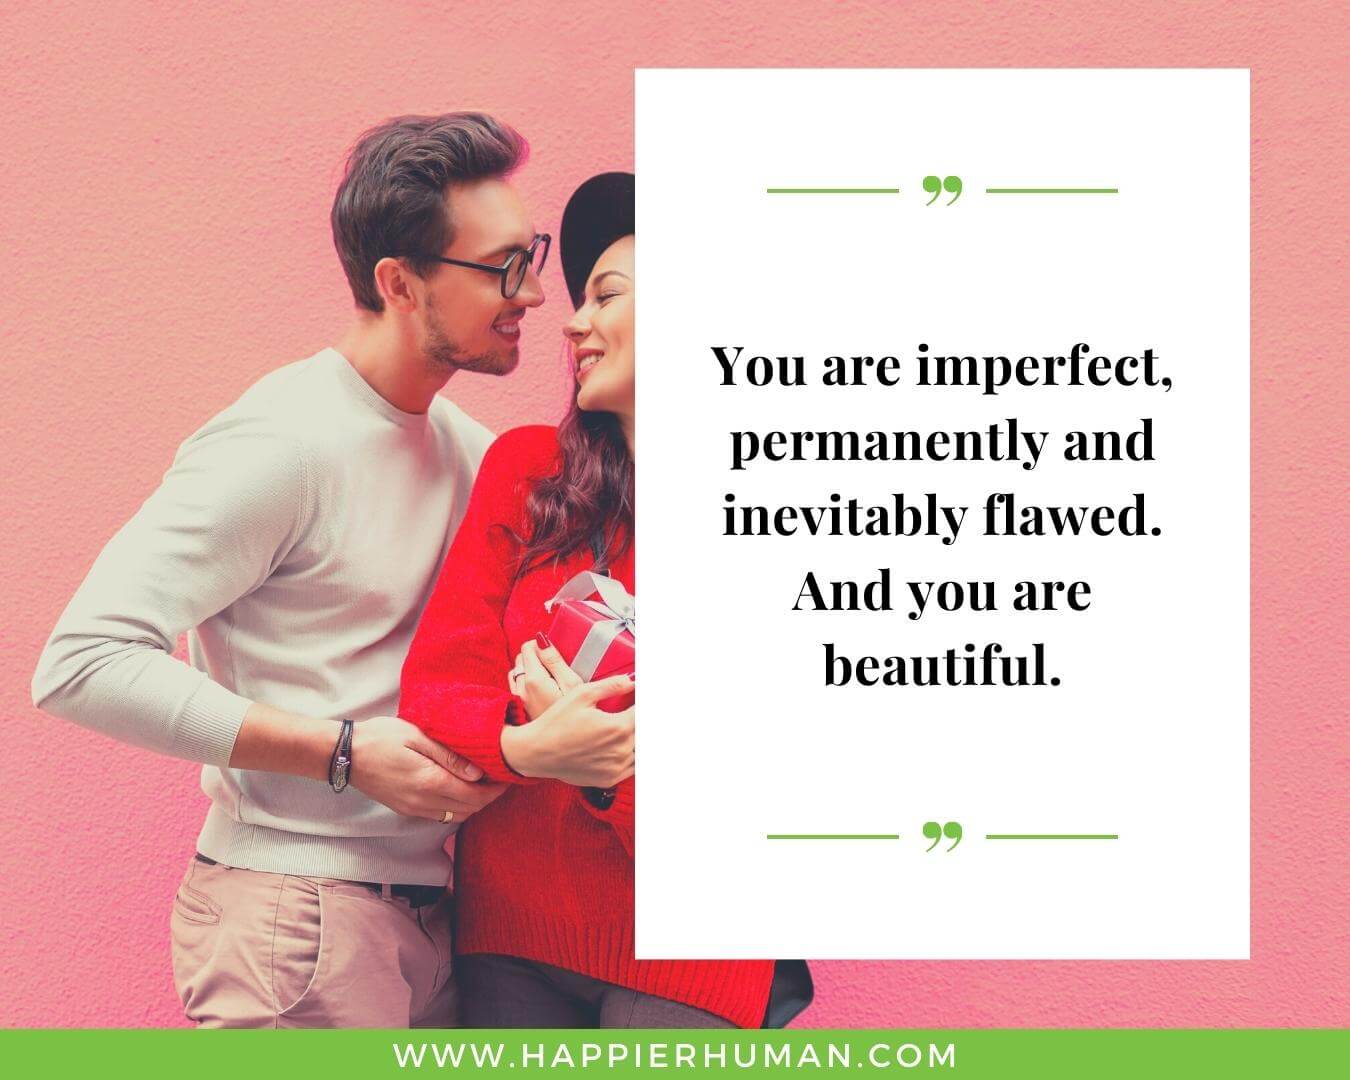 Love quotes for her without conditions- “You are imperfect, permanently and inevitably flawed. And you are beautiful.”